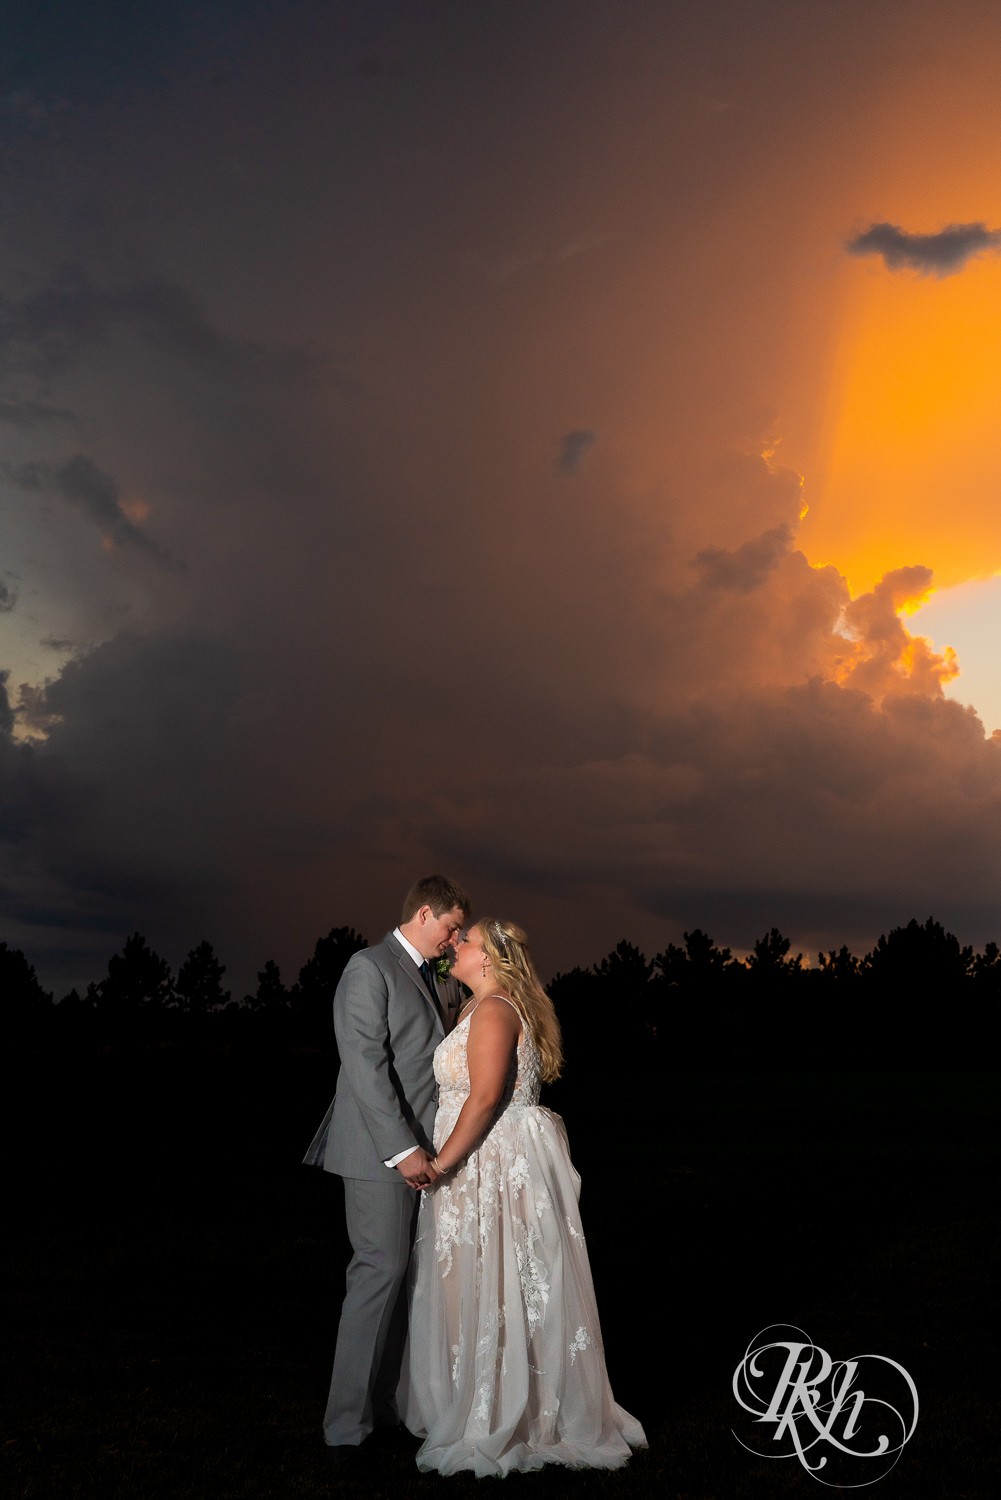 Bride and groom standing in front of an oncoming thunderstorm